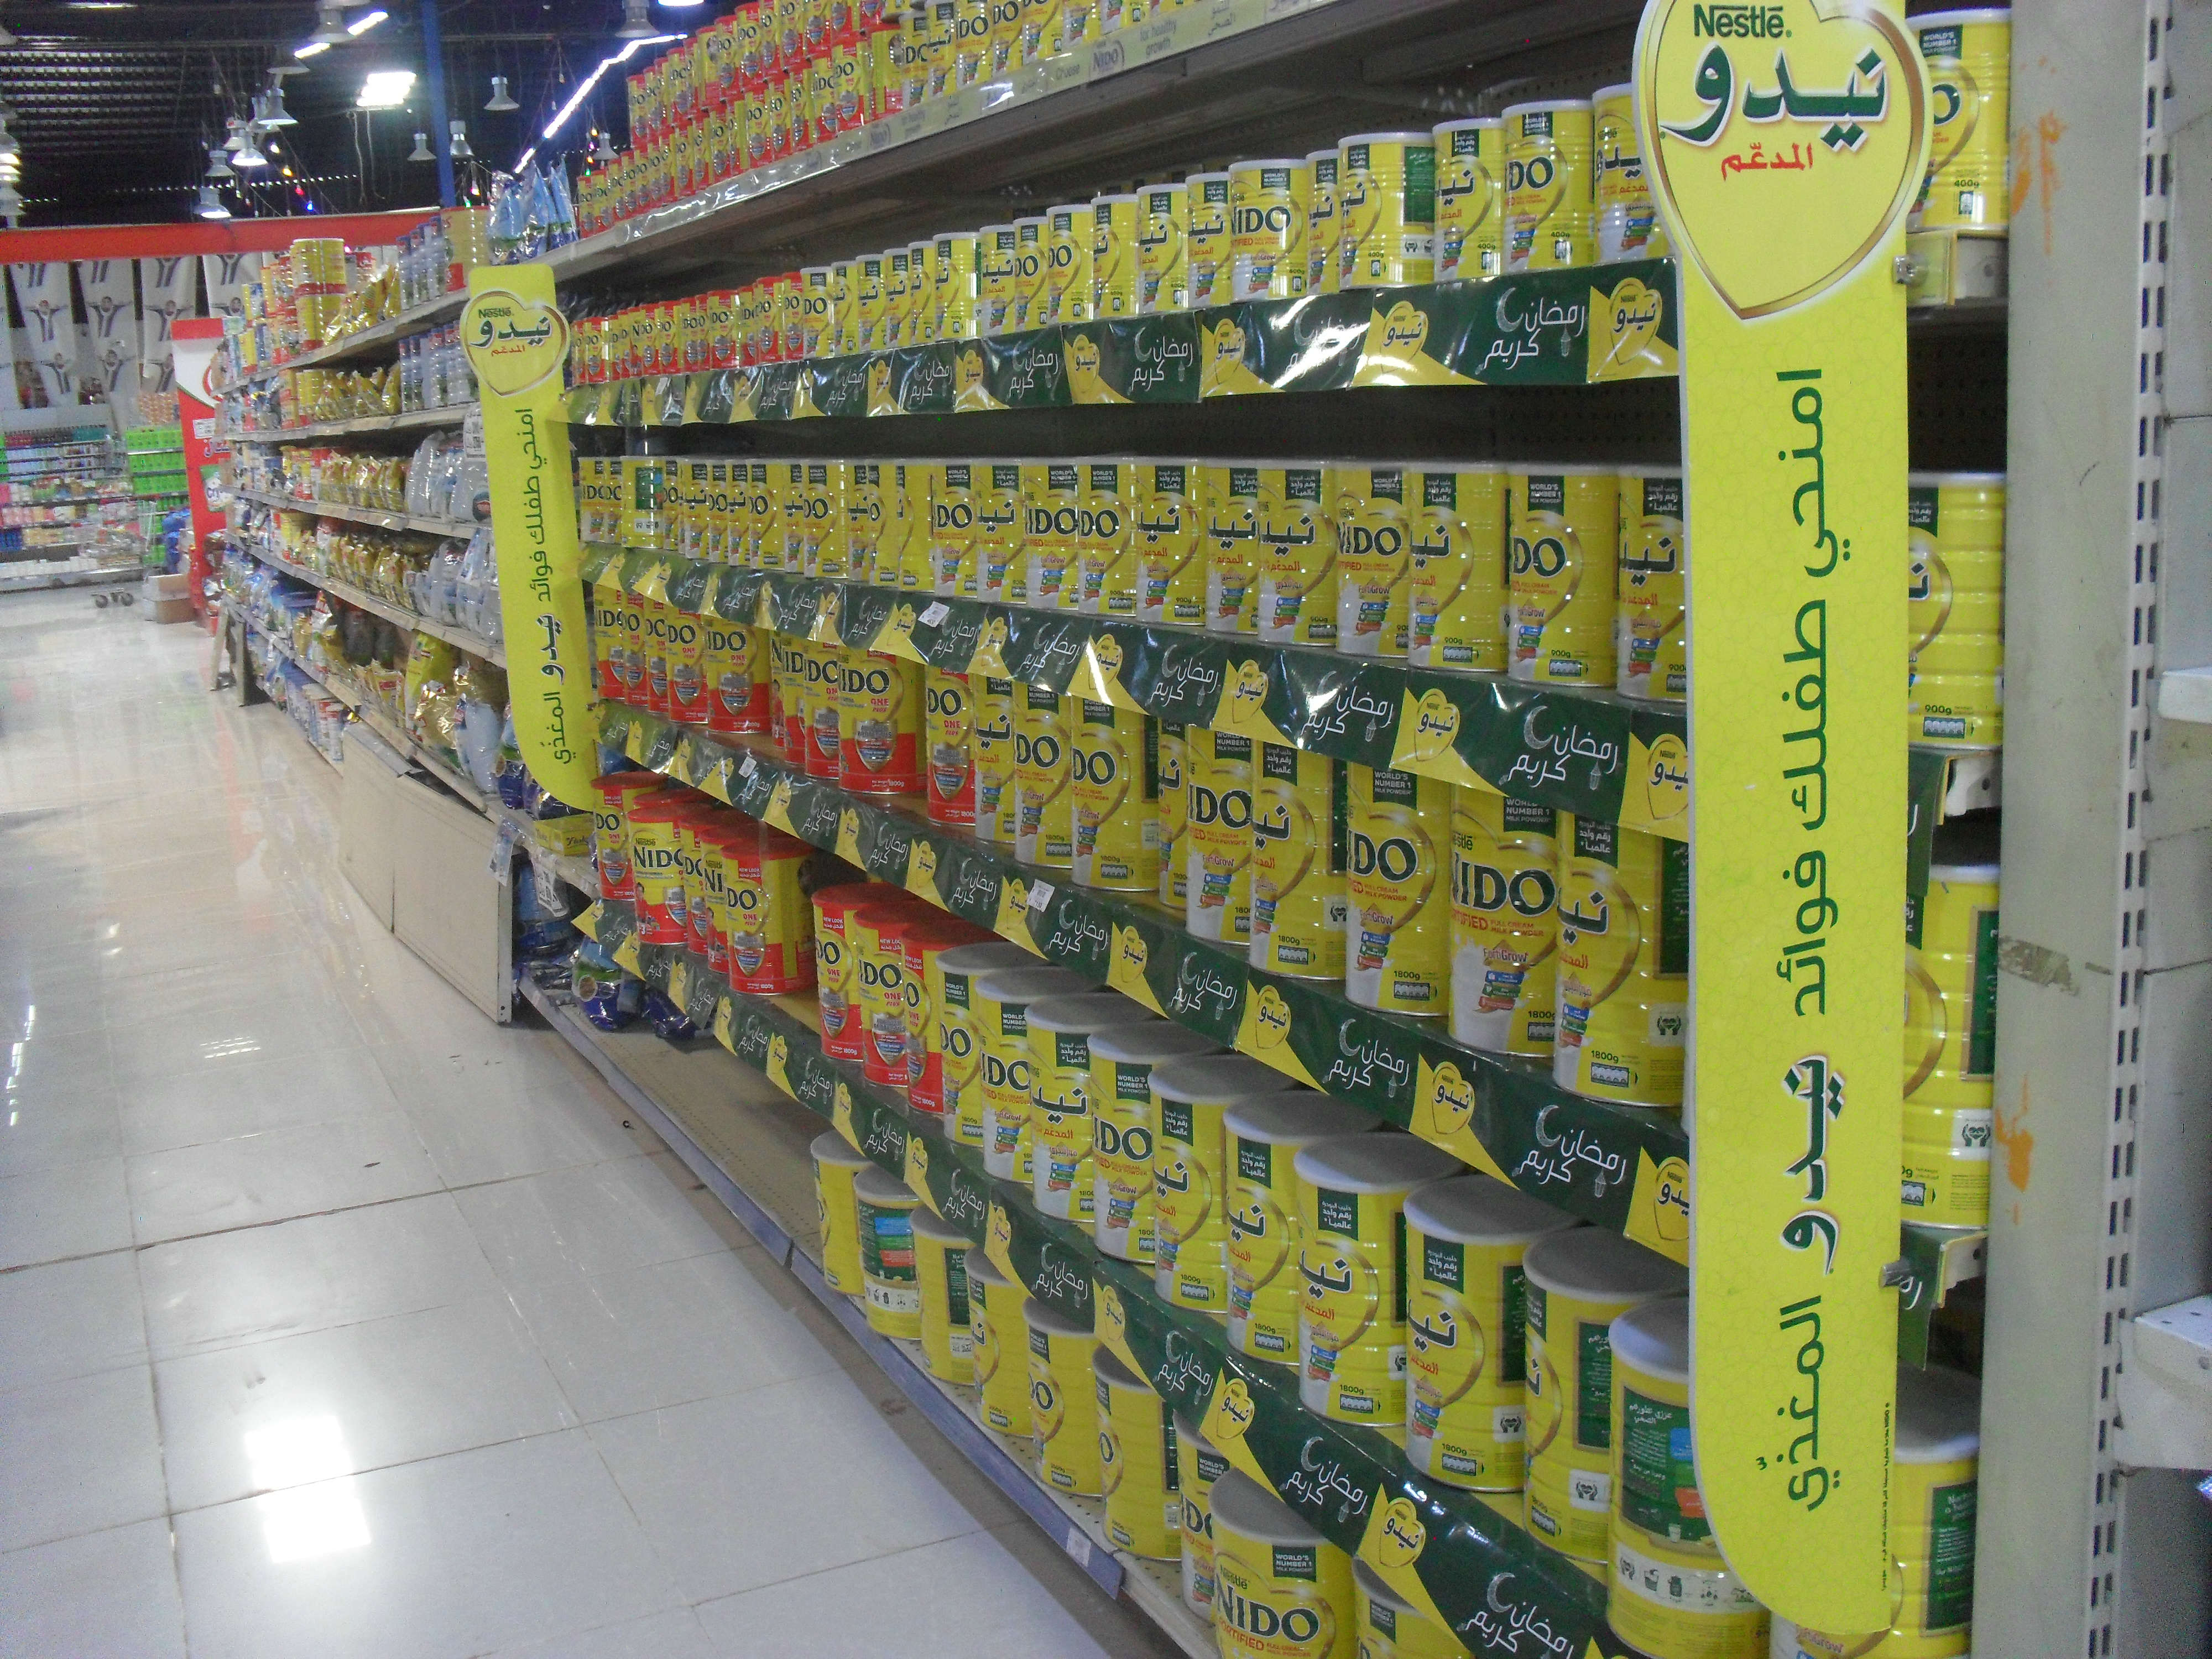 Emirati products line the shelves of a shop in Sanaa (MEE/Naseh Shaker)